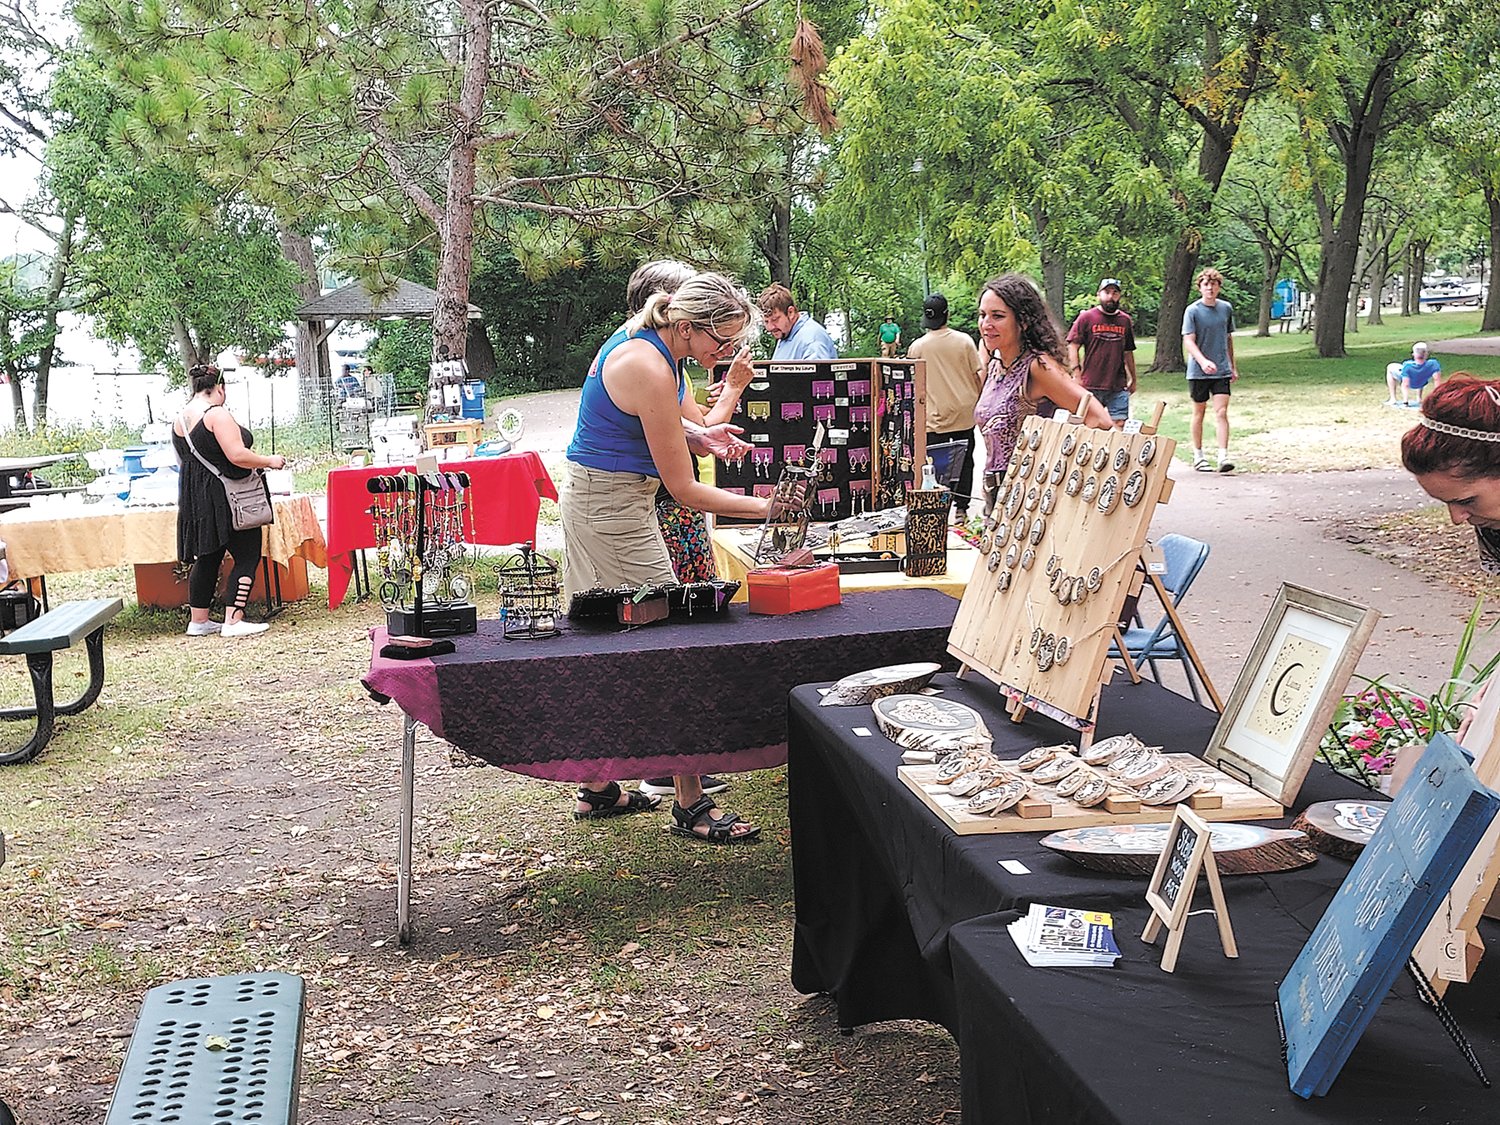 Art booths, Yoga Classes and music outside Sandcastle at Lake Nokomis ended this year's Crazy Days on Sunday, Aug. 8.